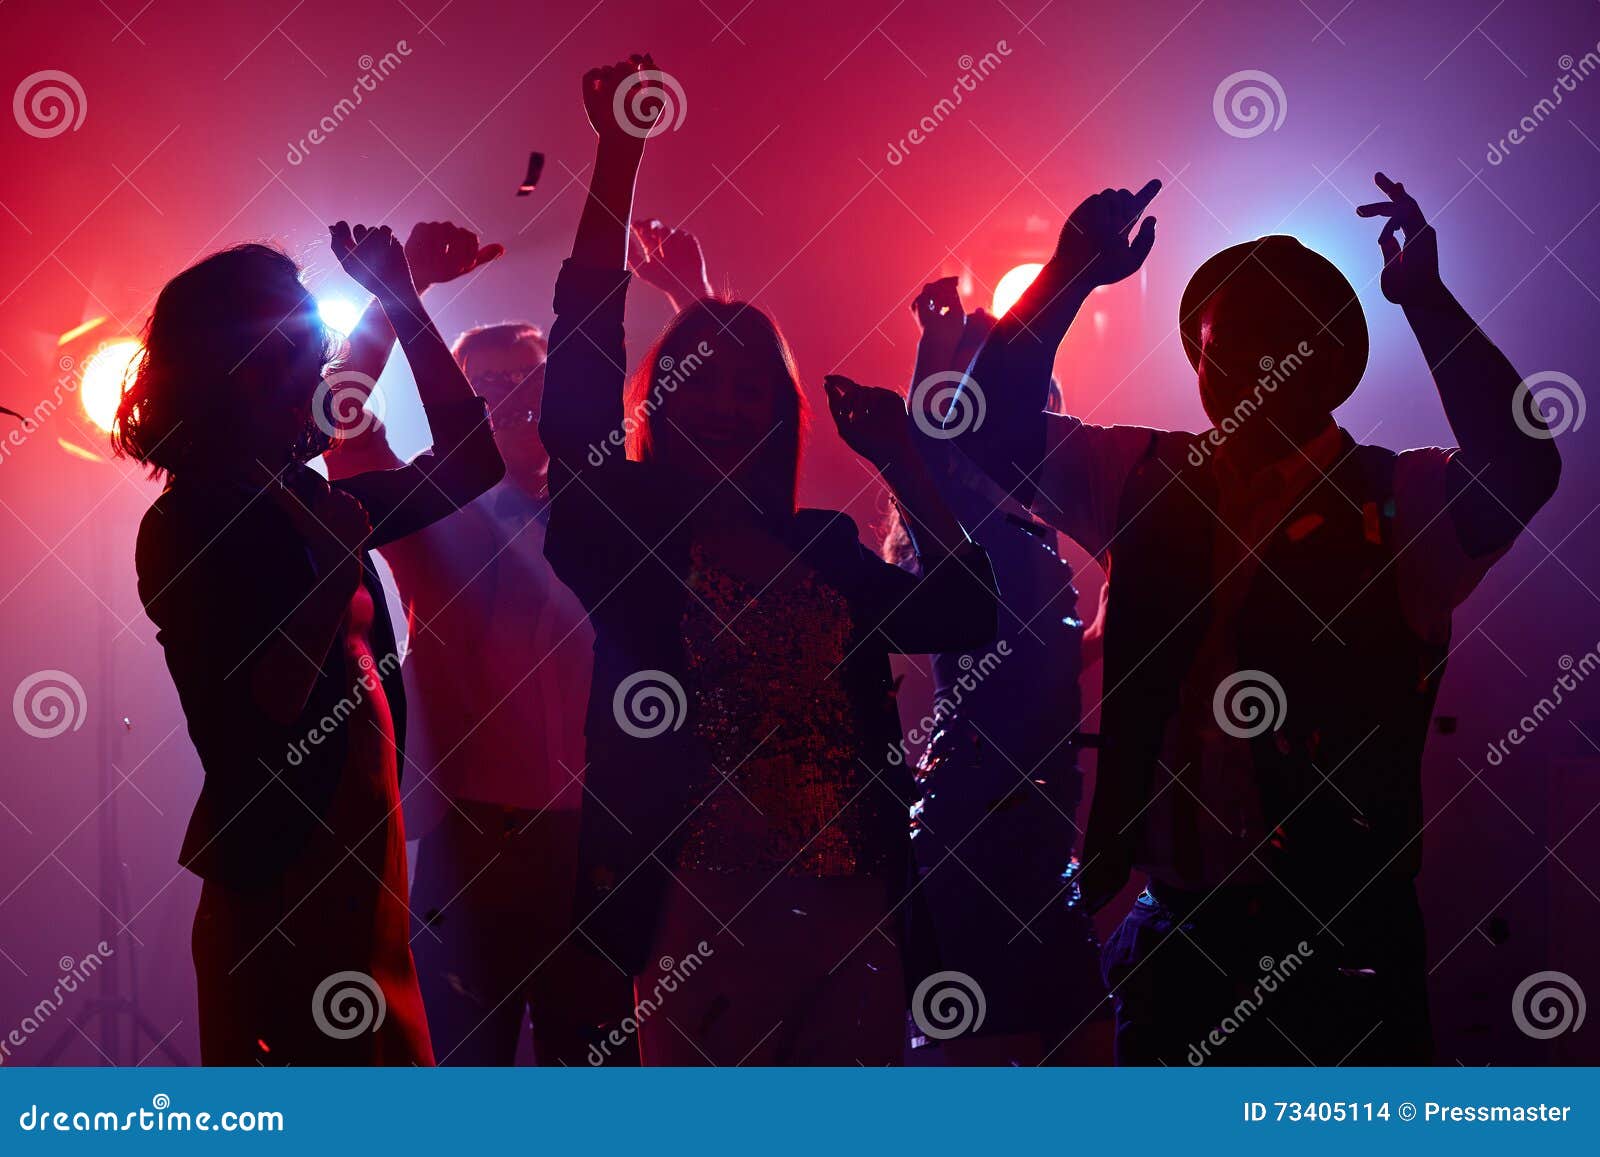 Disco dancing in red light stock photo. Image of motion - 73405114